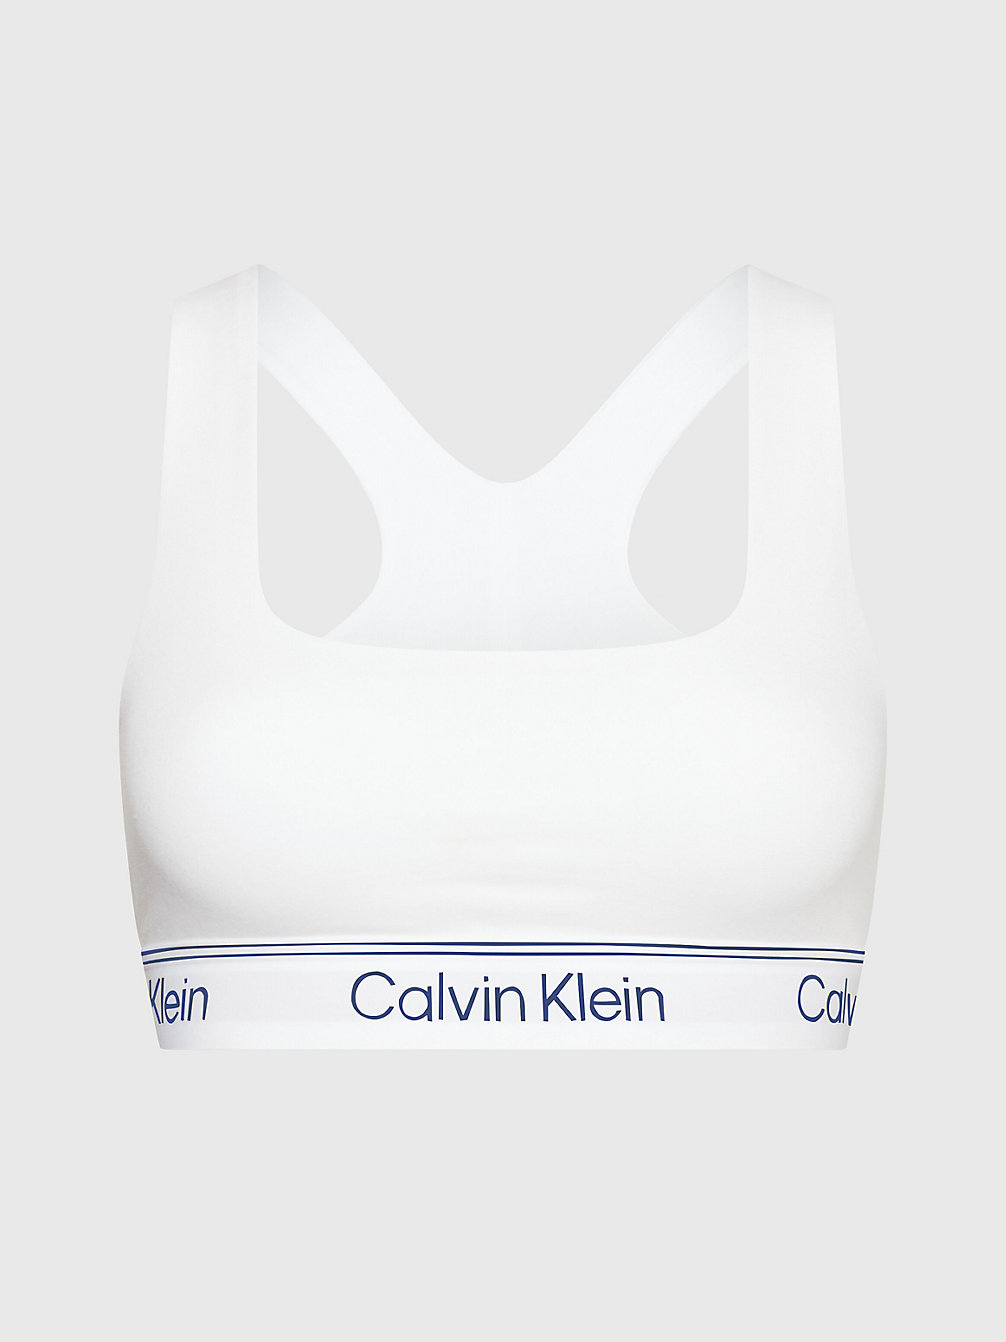 Corpiño - Athletic Cotton > WHITE > undefined mujer > Calvin Klein